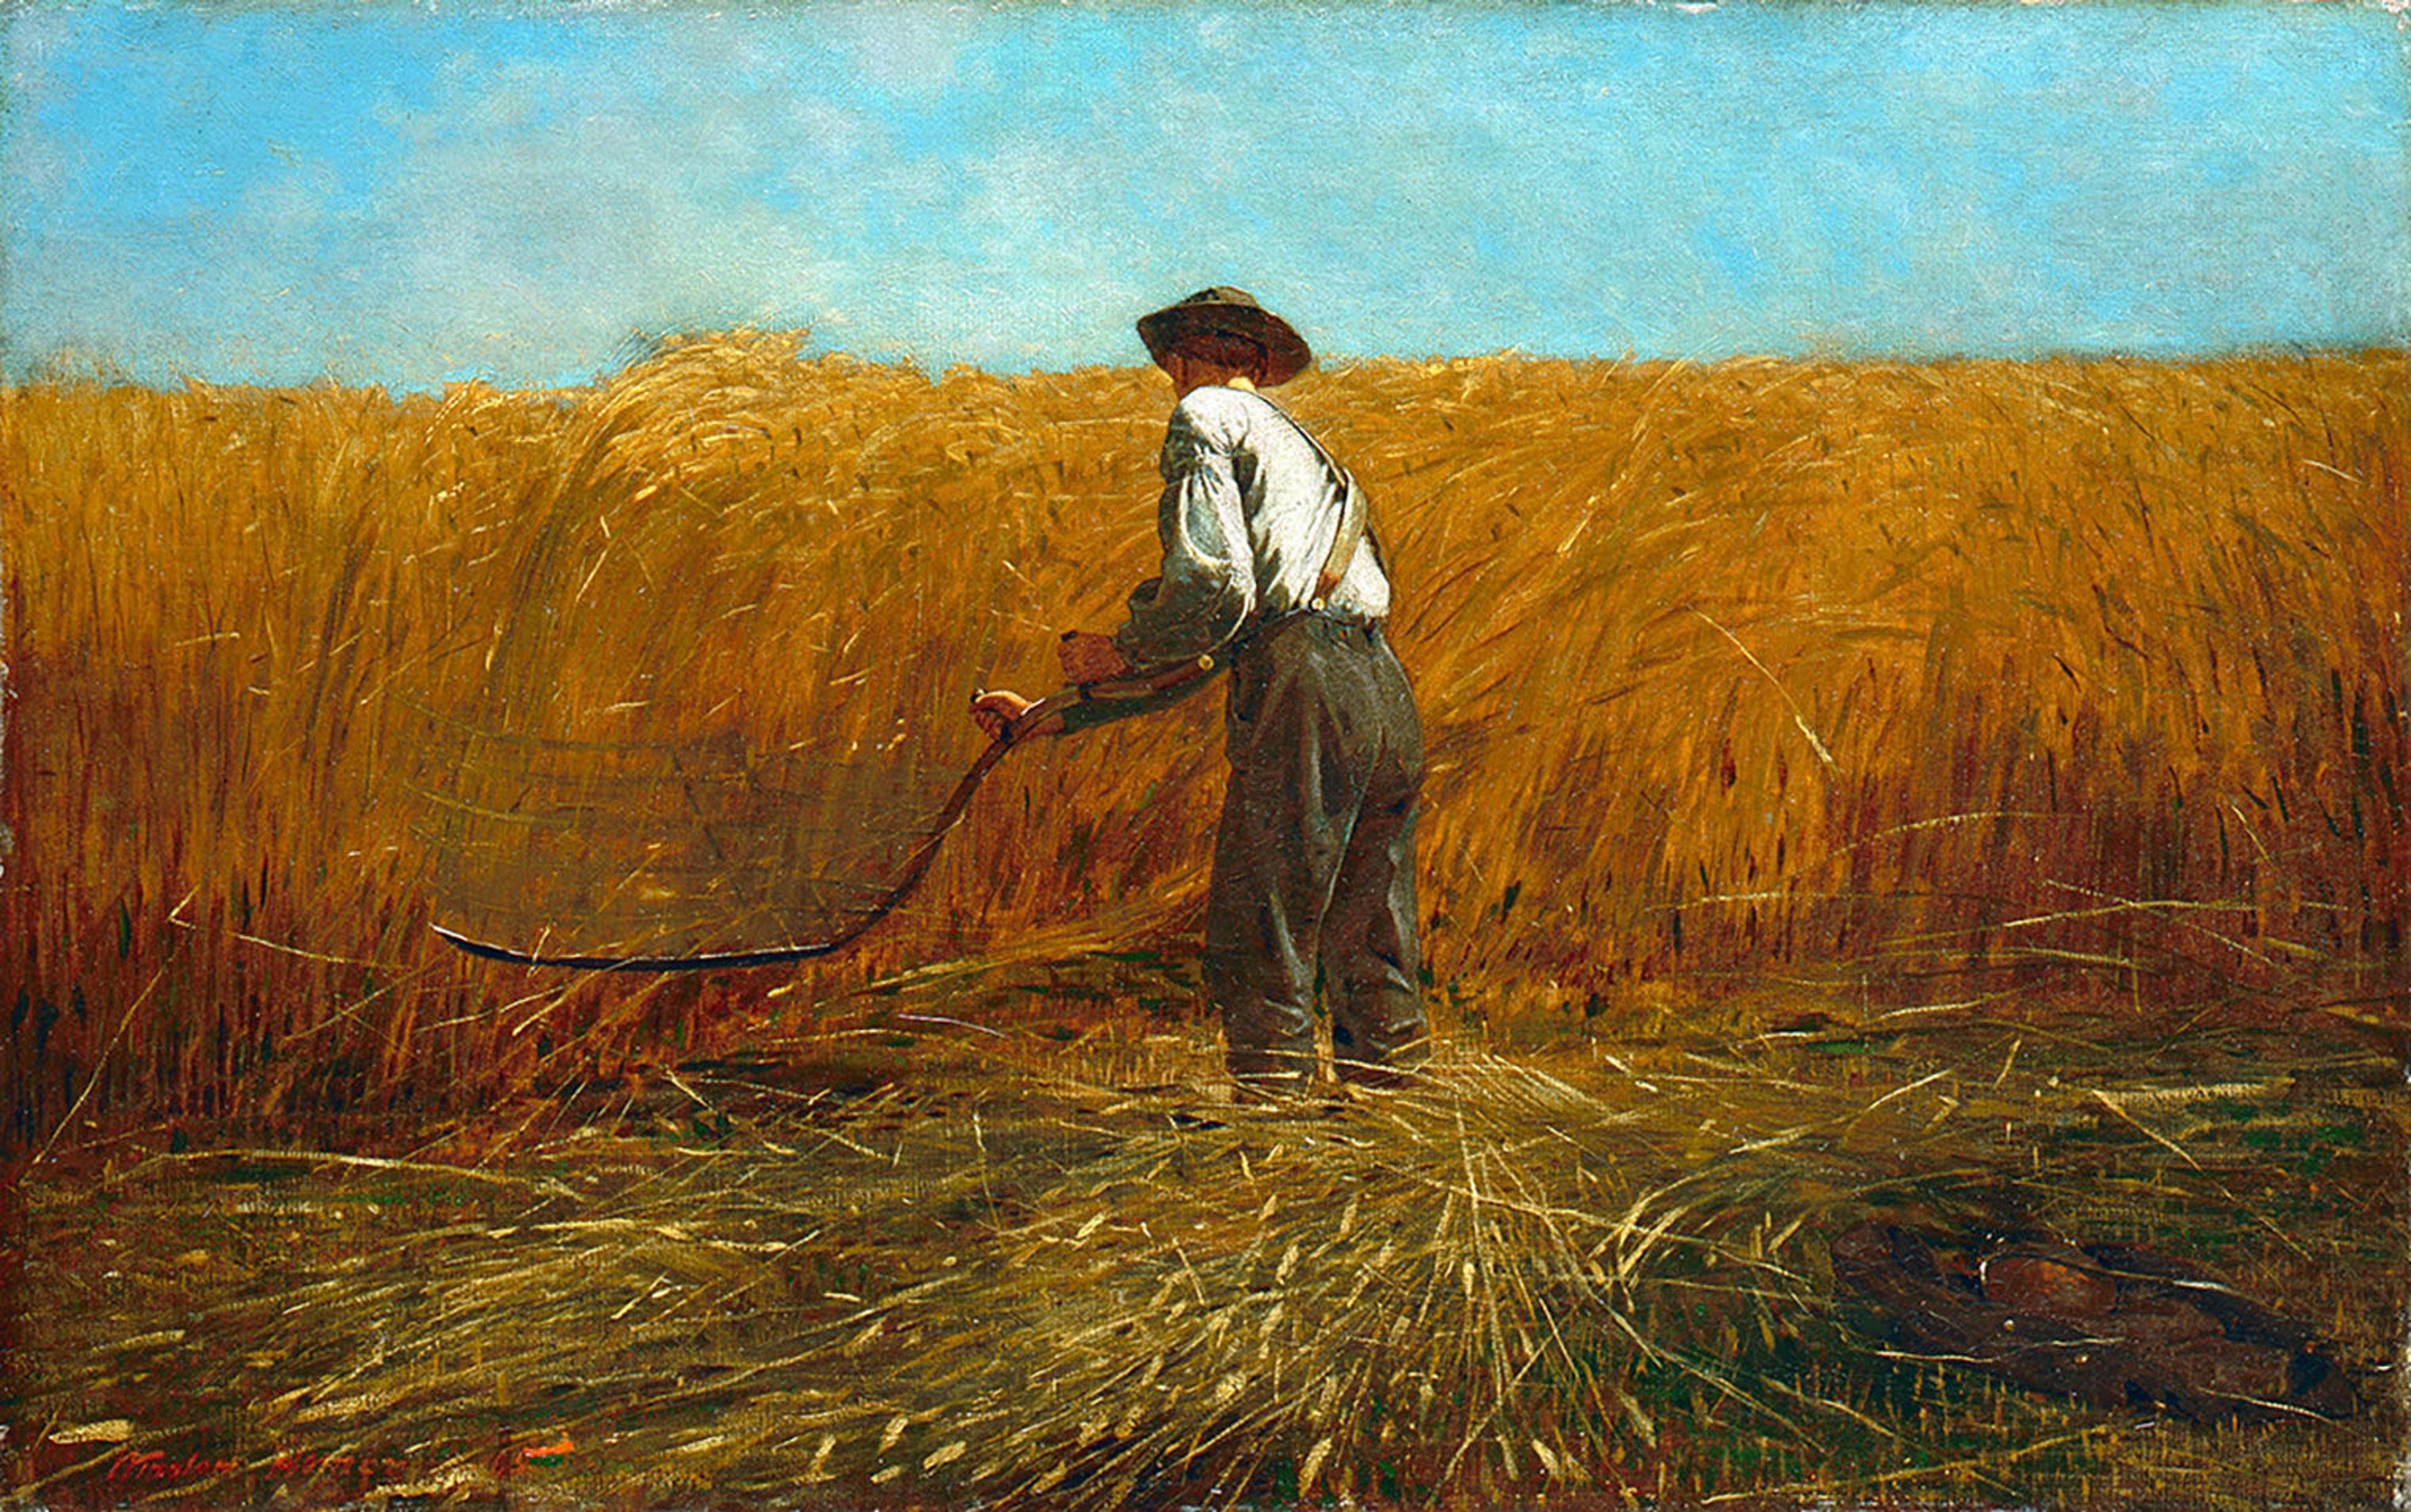 A painting of a farmer reaping a field